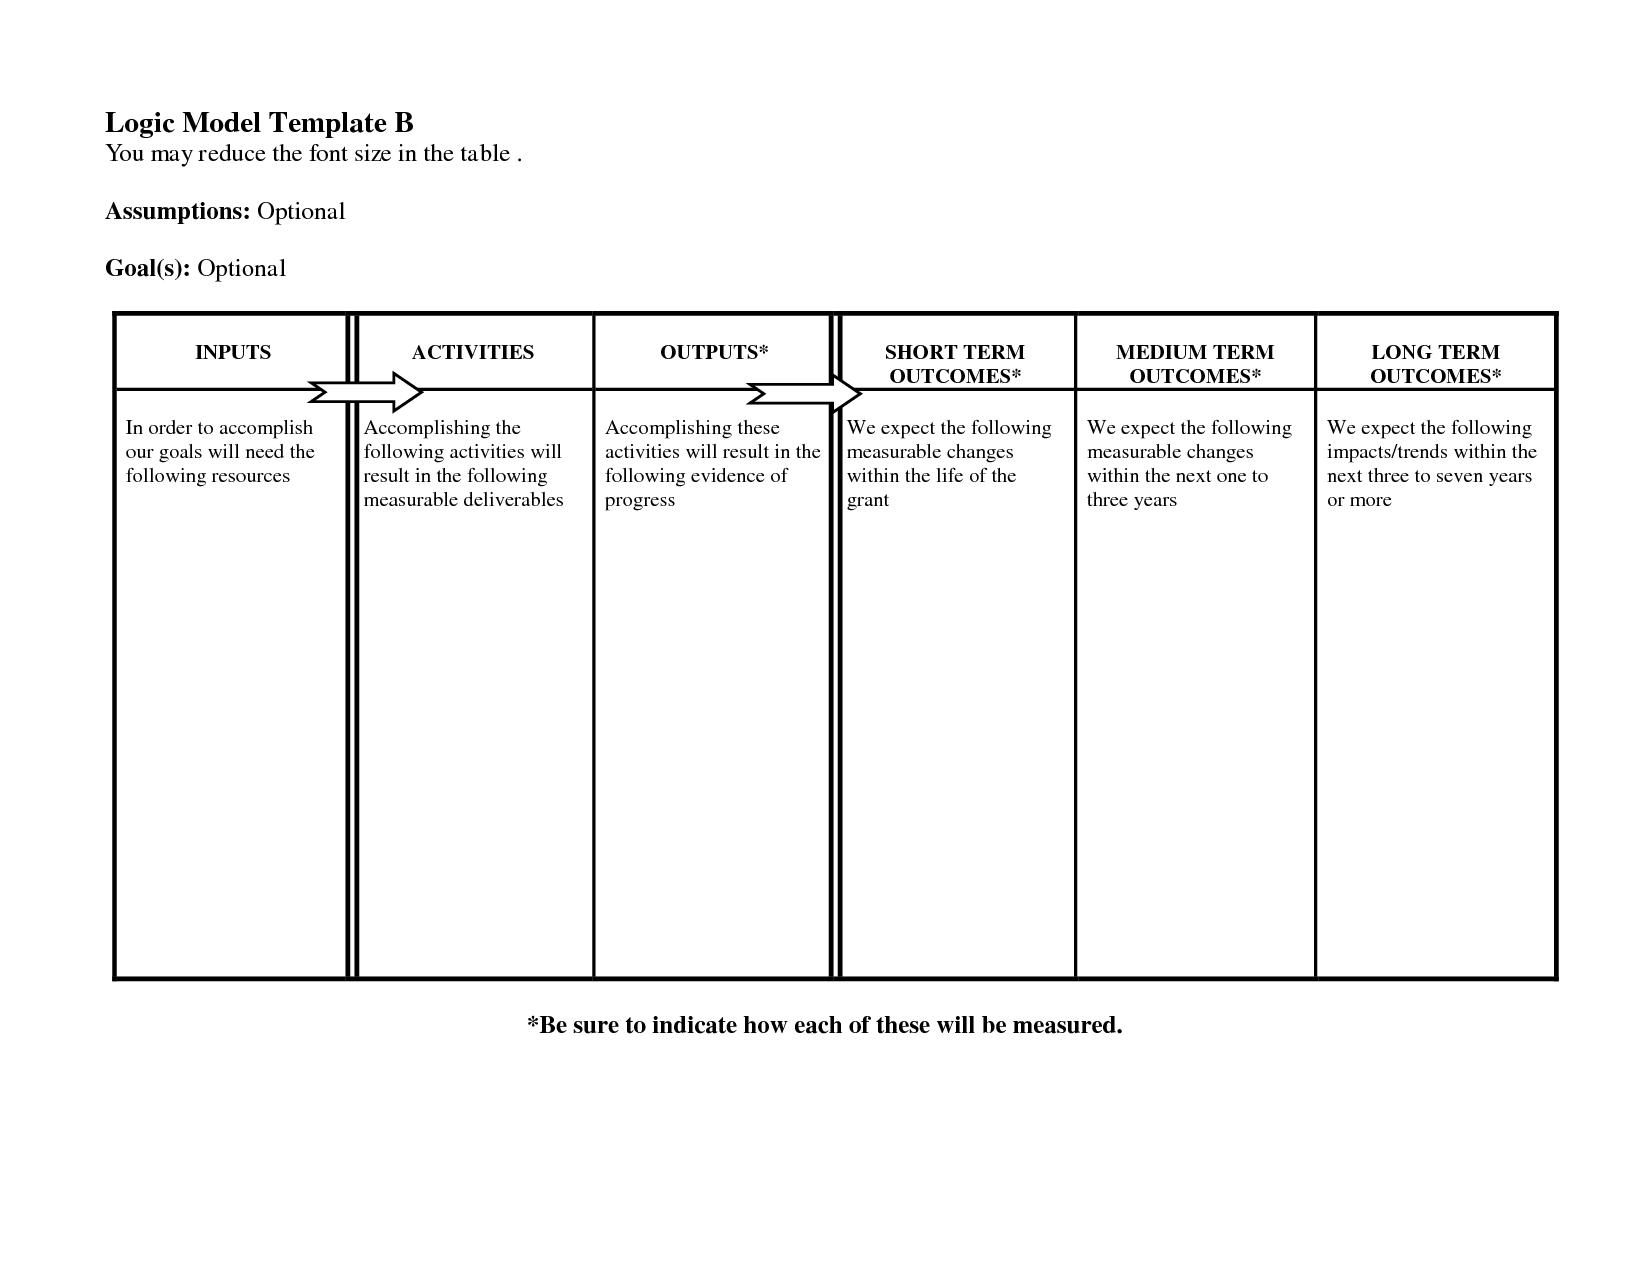 Free Logic Templates Download ] - Of Social Media Marketing With Regard To Logic Model Template Word